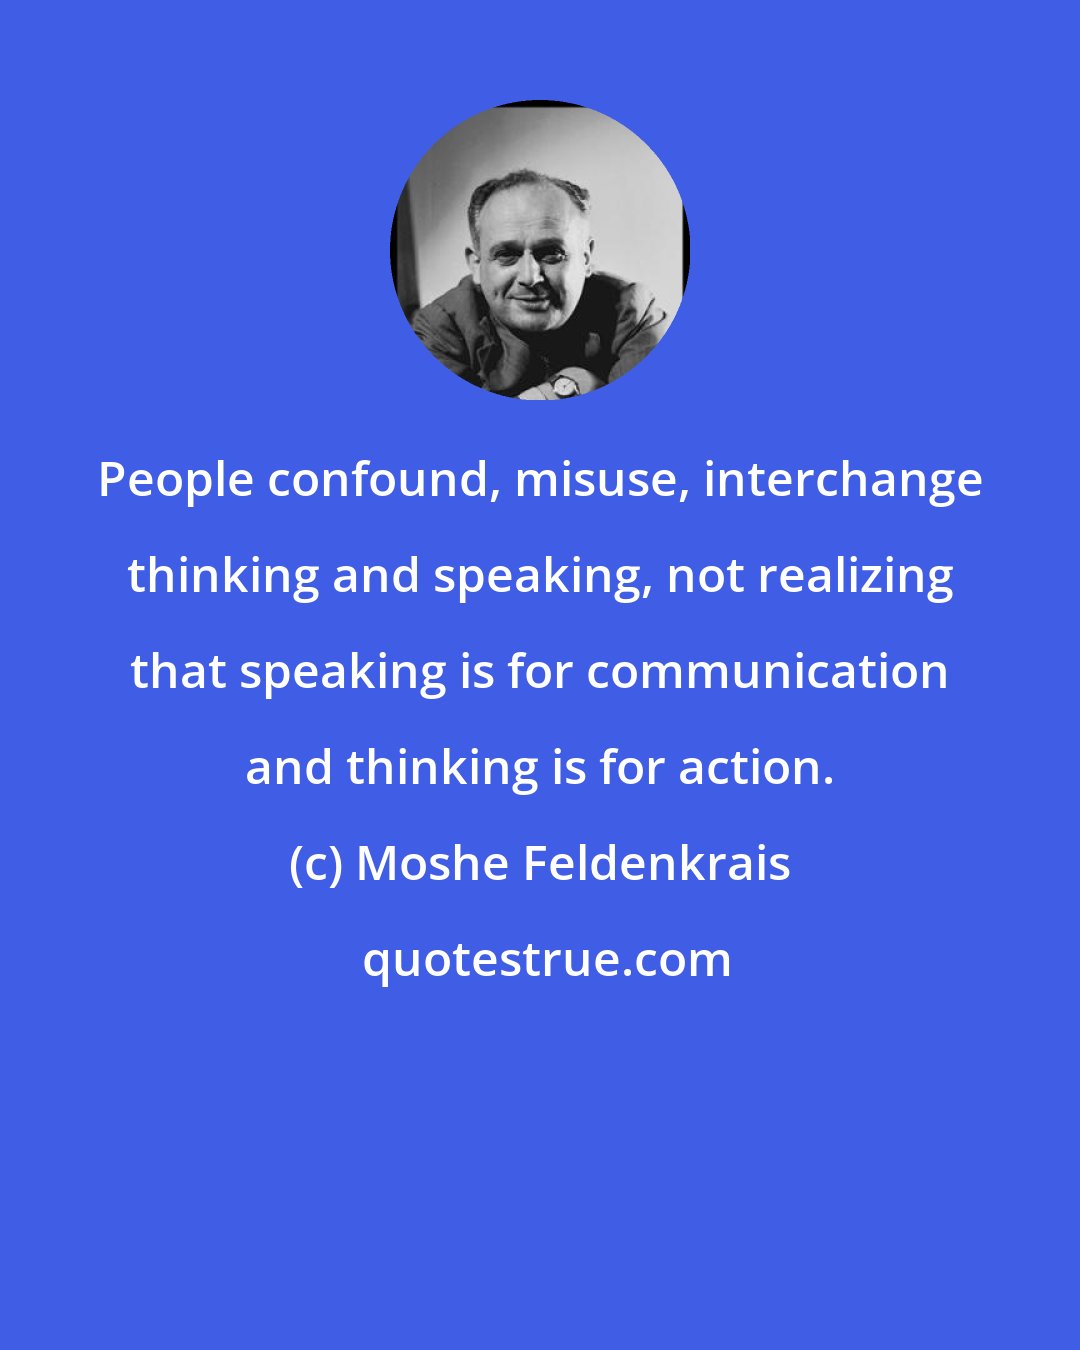 Moshe Feldenkrais: People confound, misuse, interchange thinking and speaking, not realizing that speaking is for communication and thinking is for action.